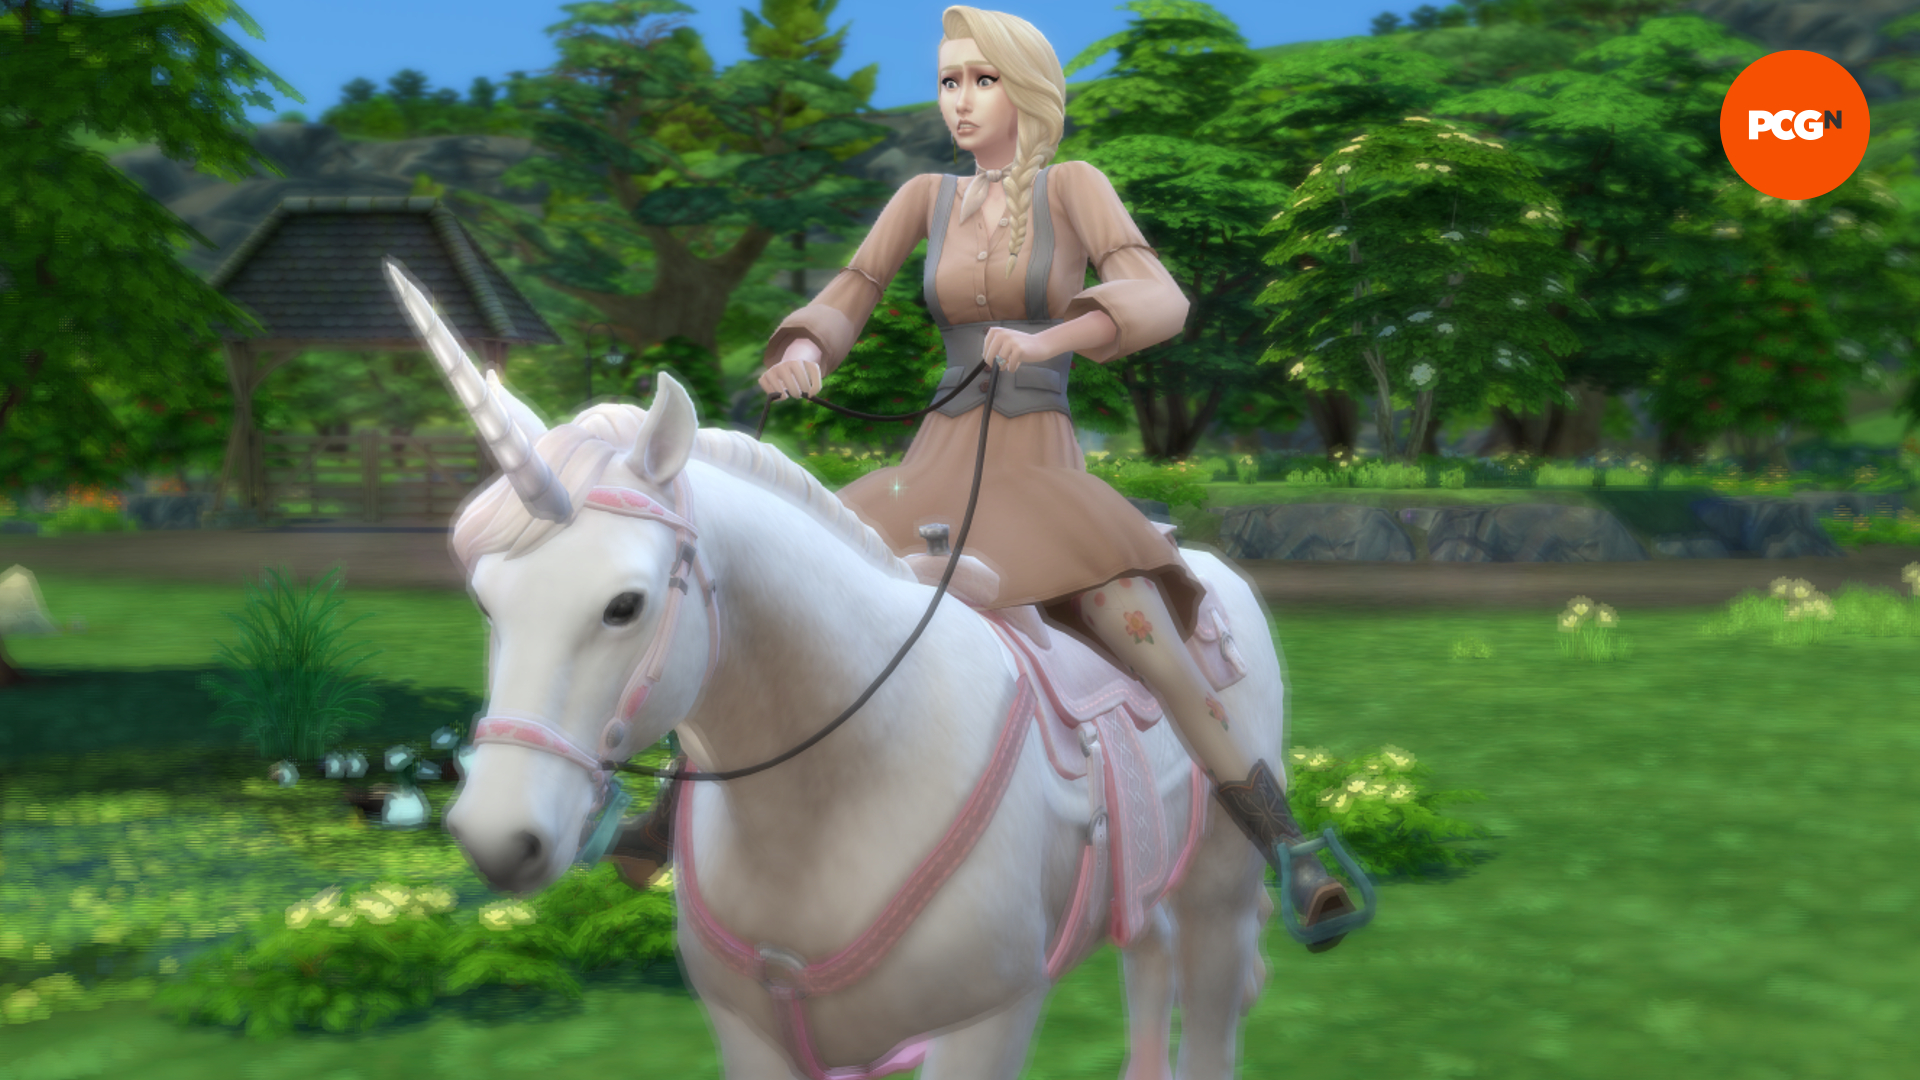 A blonde Sim rides a pink and white unicorn looking uncertain